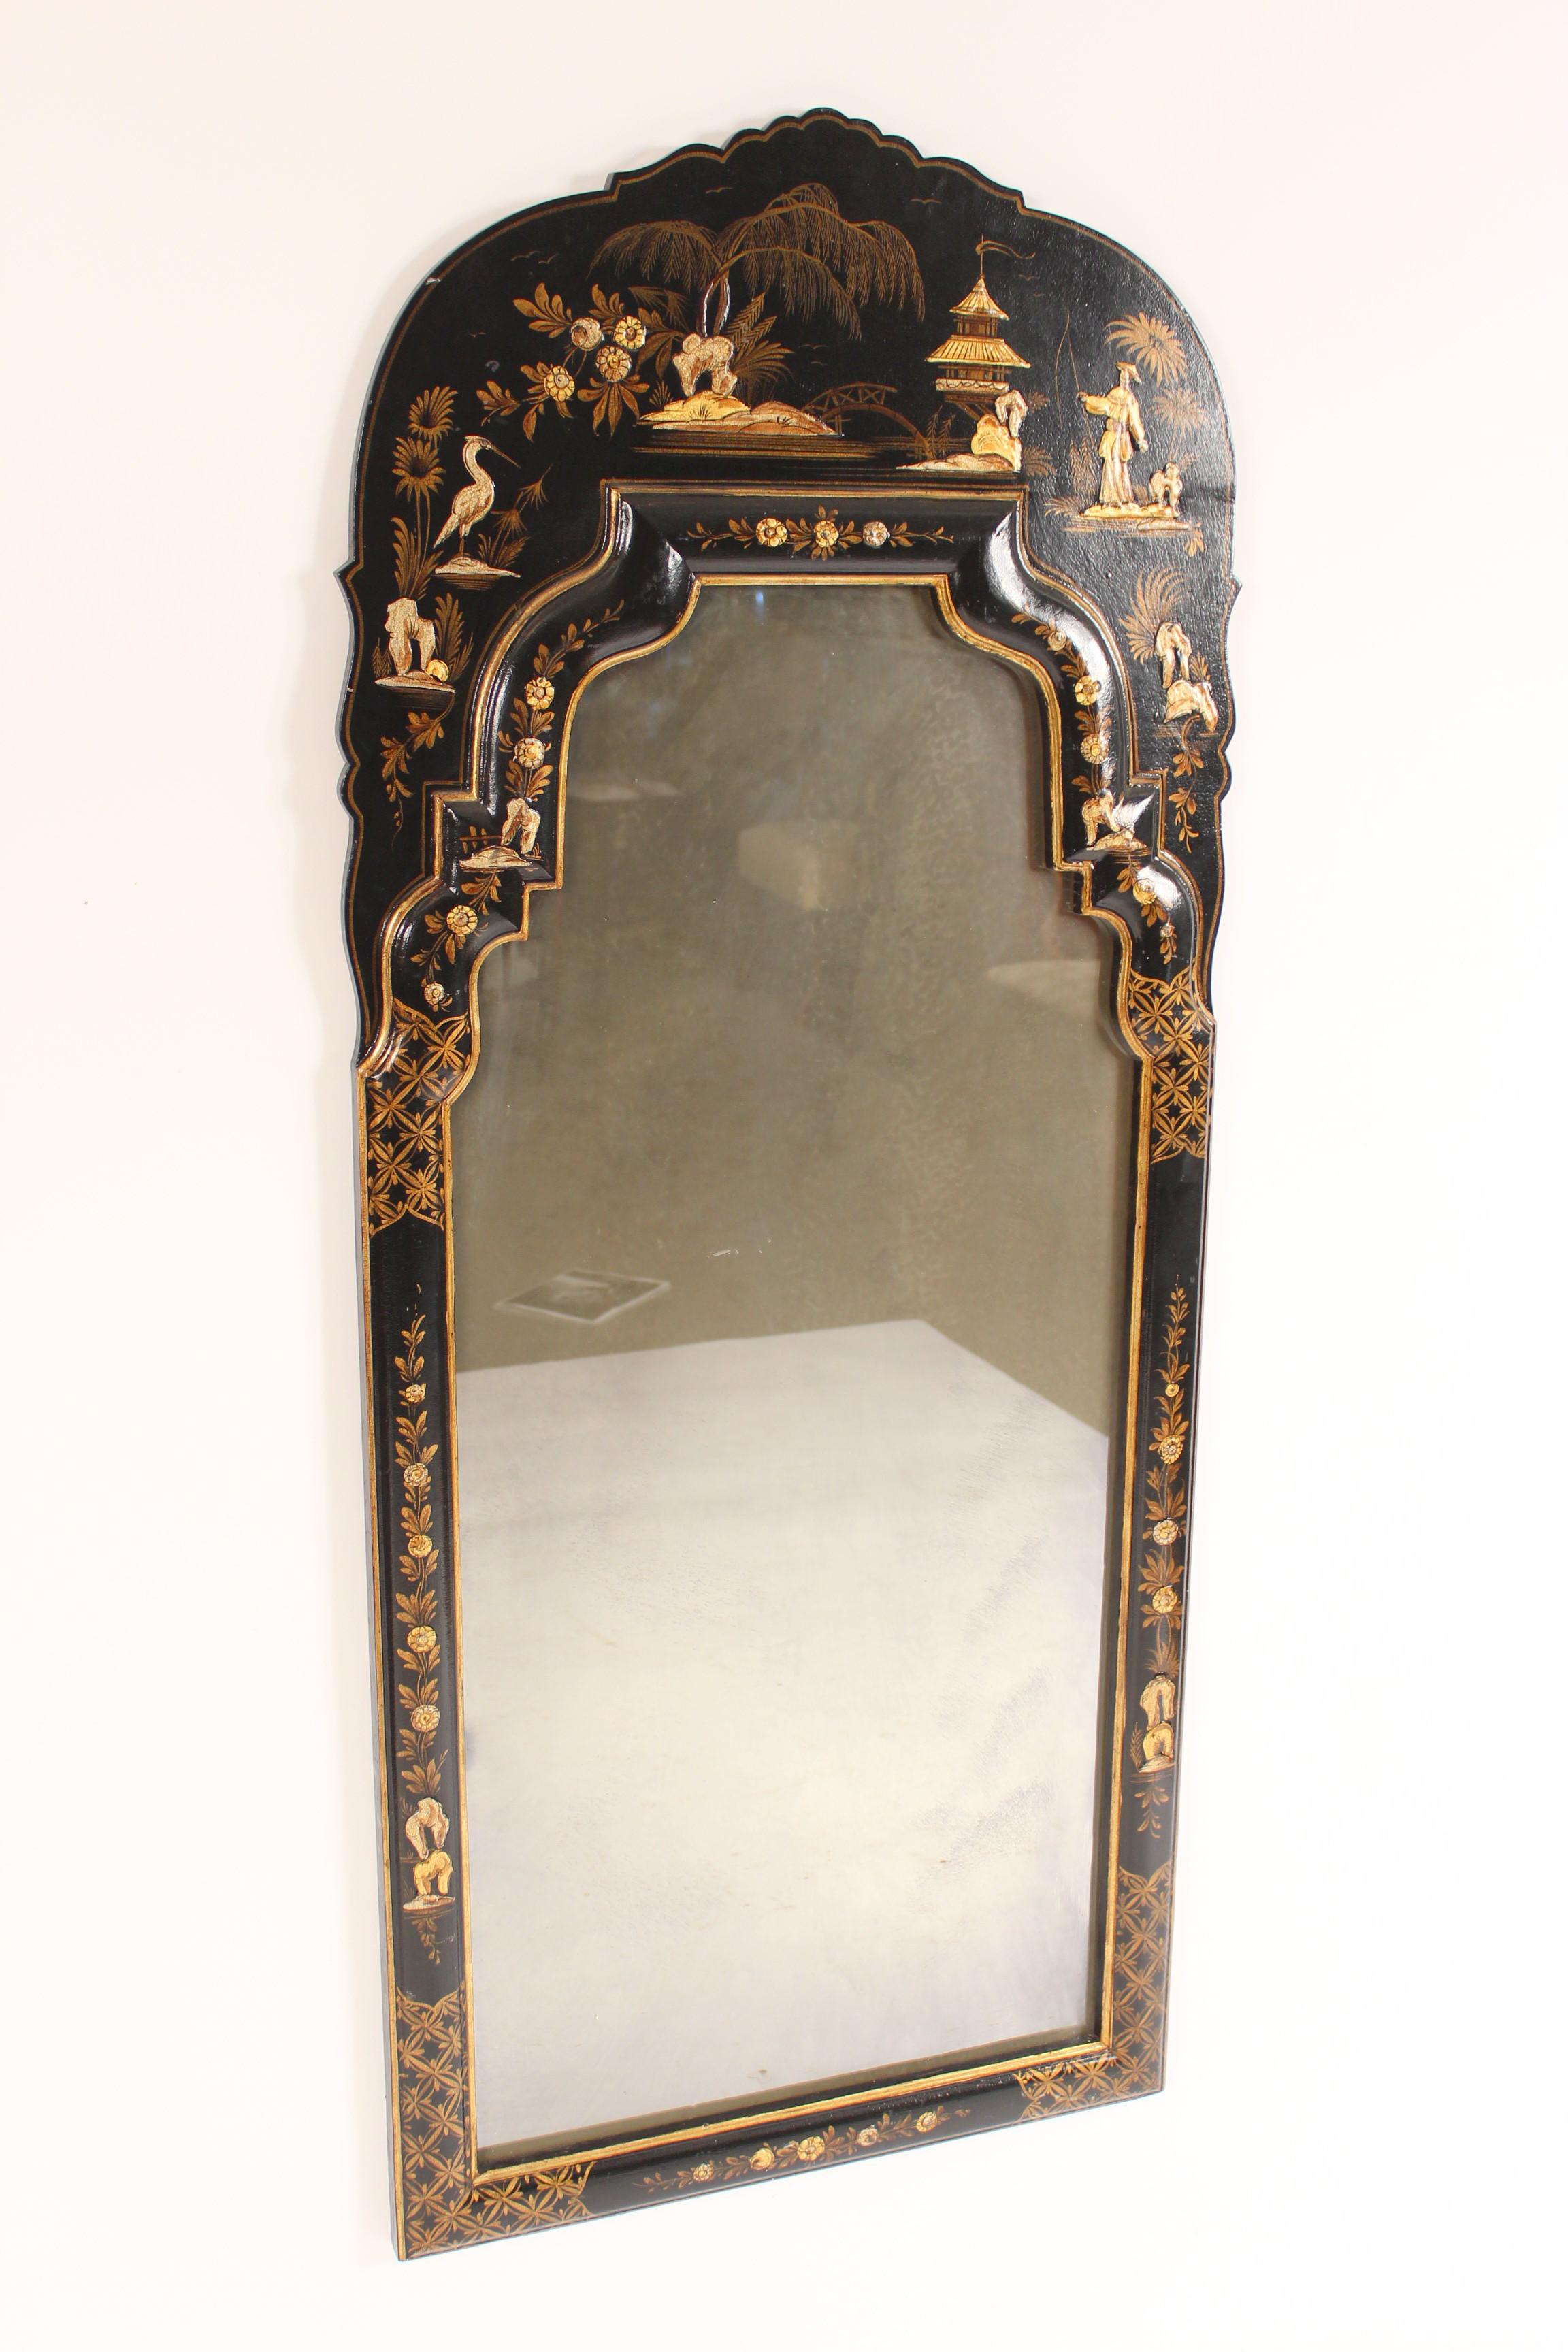 George I style black chinoiserie decorated mirror, late 20th century. With raised chinoiserie decorations.